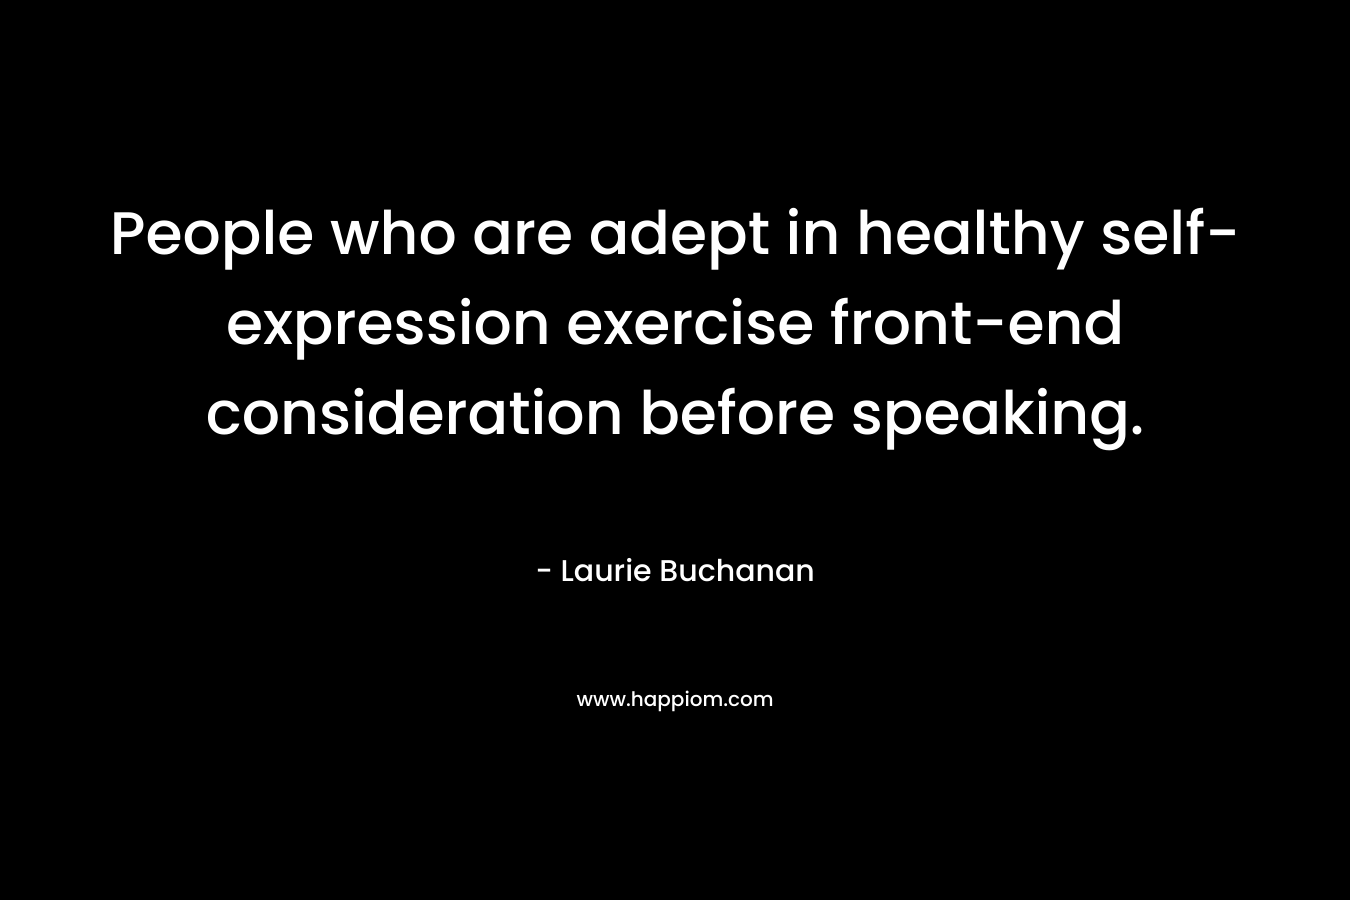 People who are adept in healthy self-expression exercise front-end consideration before speaking.